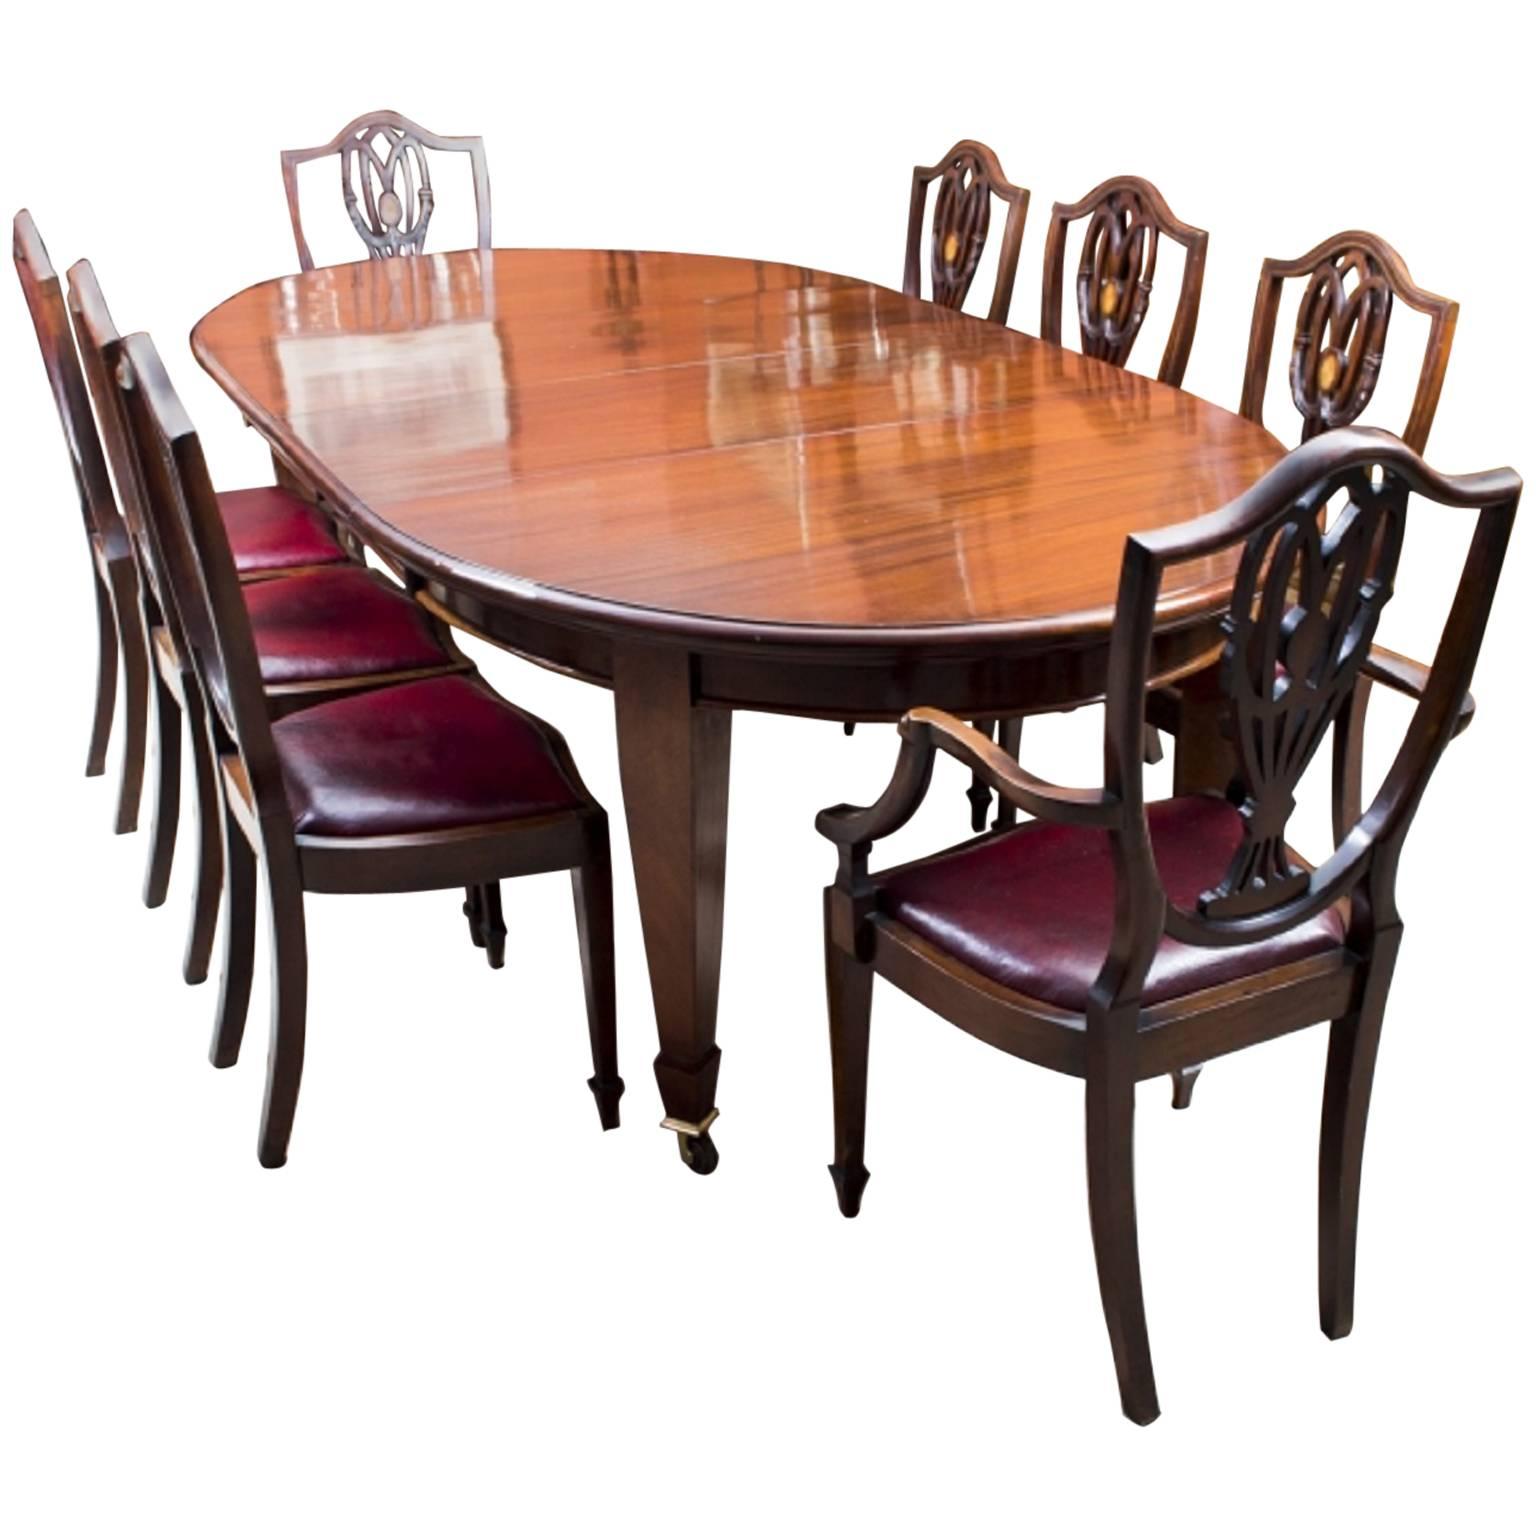 Antique Edwardian Dining Table with Eight Chairs, circa 1900